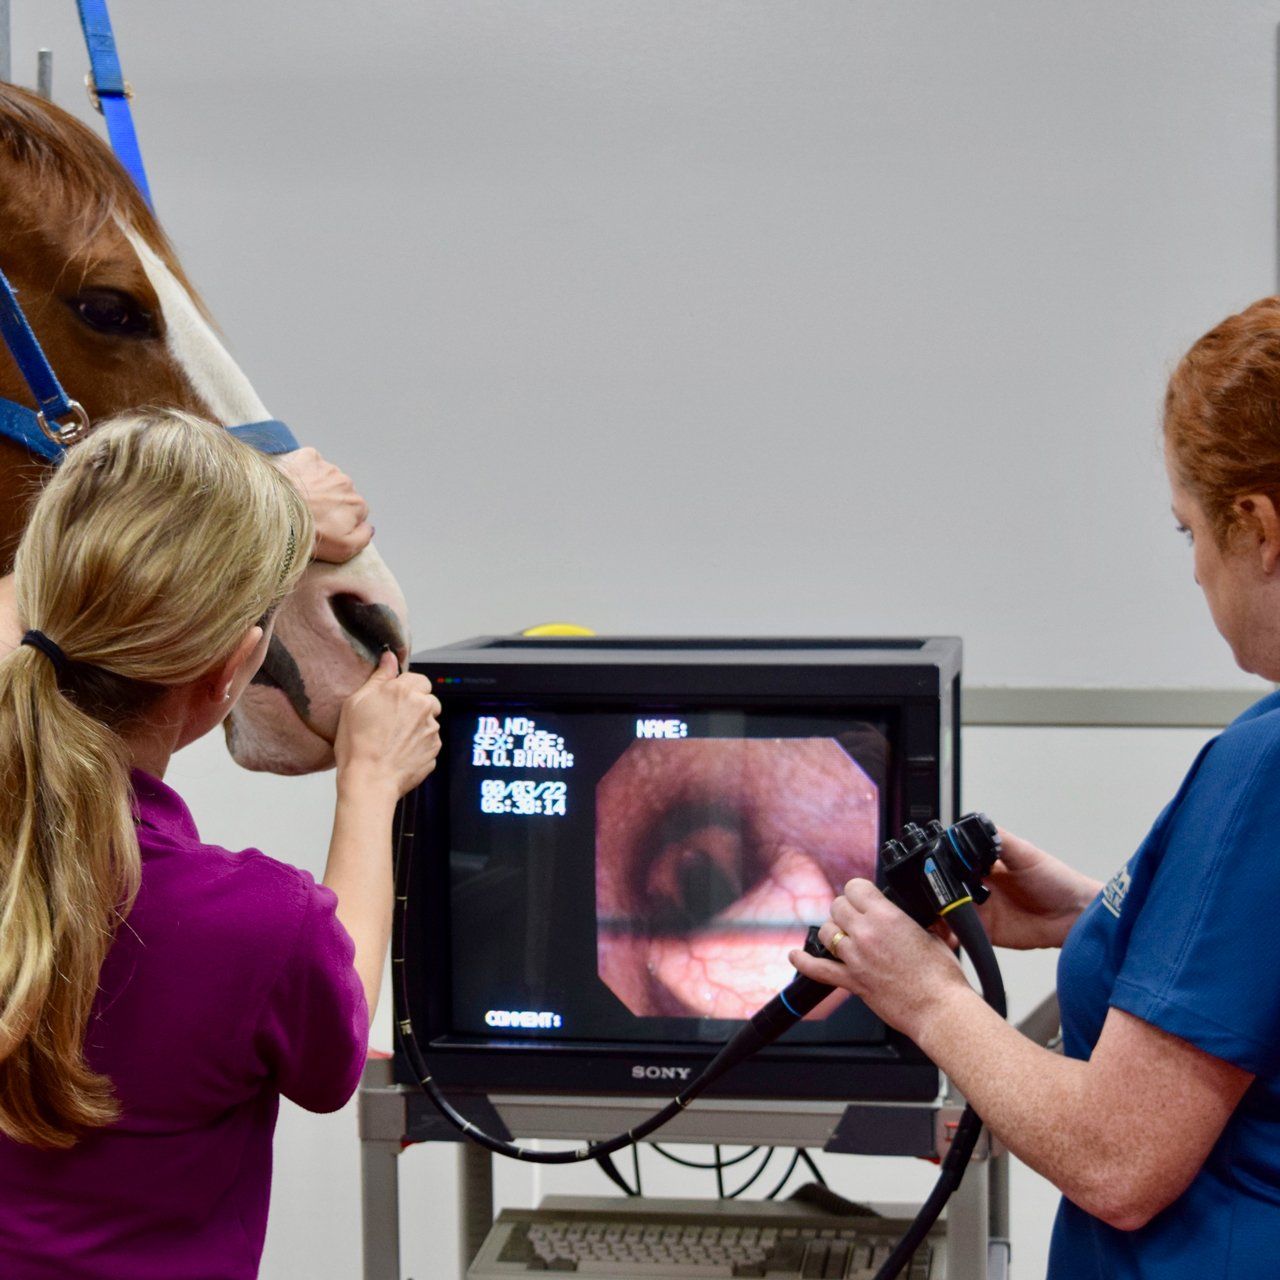 Video and portable endoscopies are used by EMS to evaluate respiratory function.